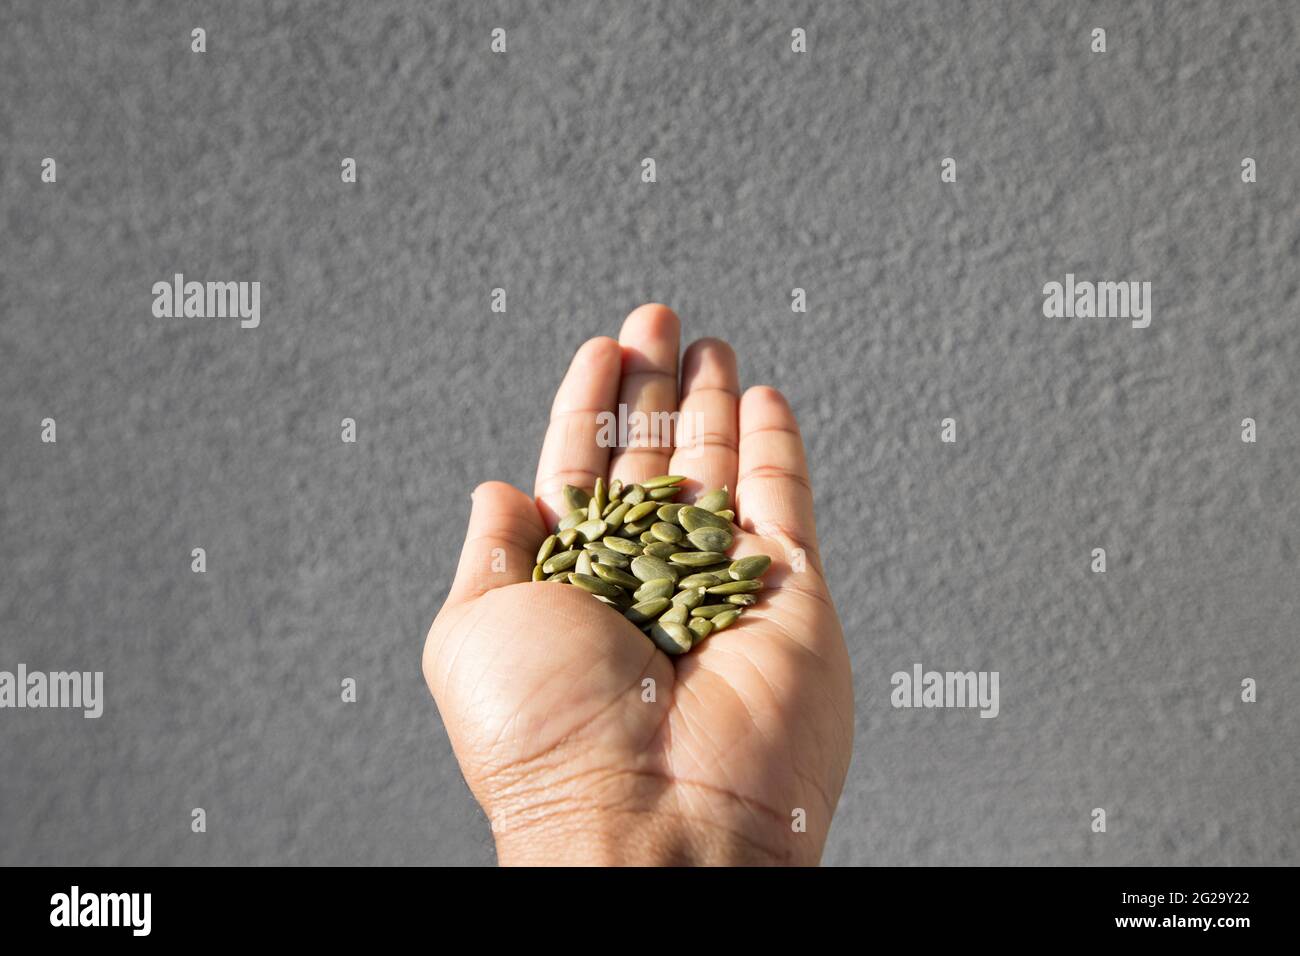 A hand is holding some green organic pumpkin seed kernels against a textured grey background. Stock Photo